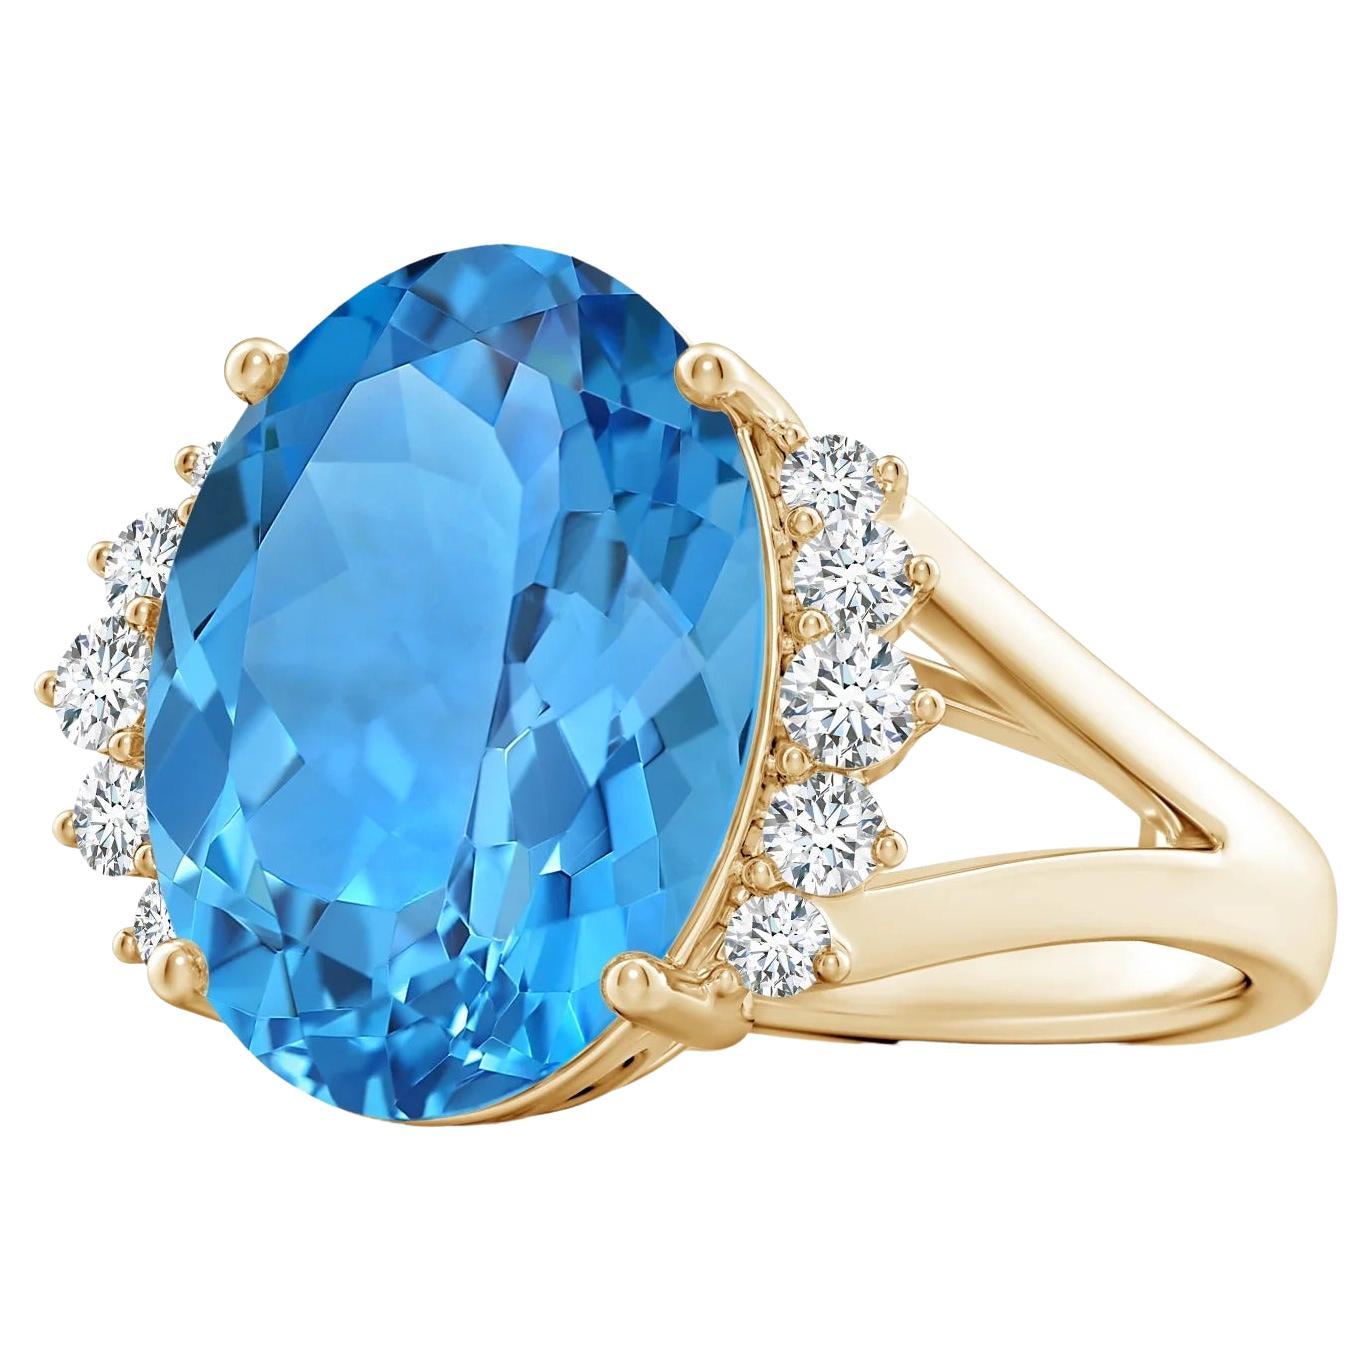 For Sale:  ANGARA GIA Certified Natural Swiss Blue Topaz Ring in Yellow Gold with diamonds